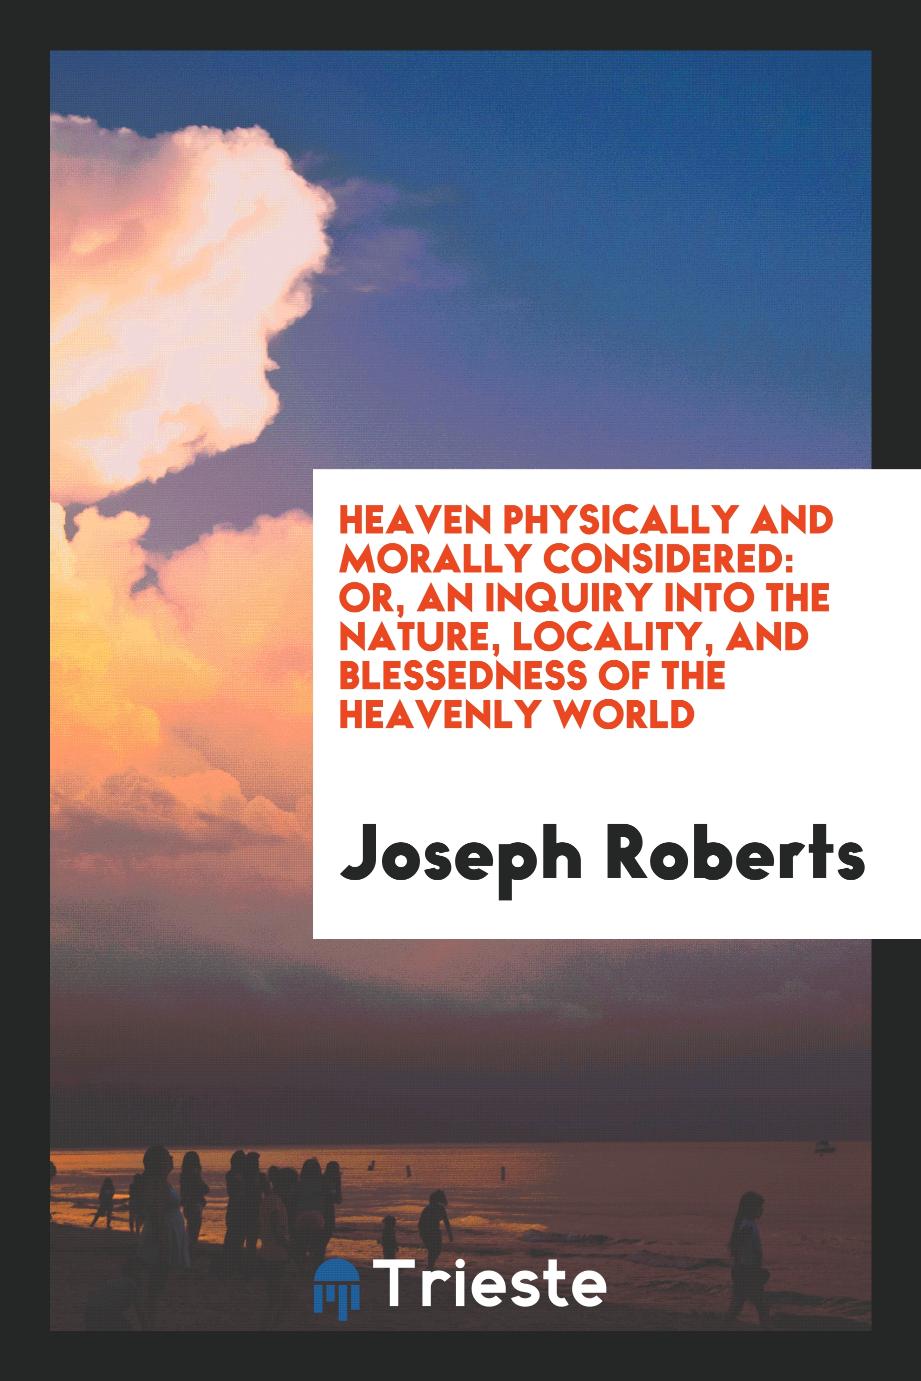 Heaven Physically and Morally Considered: Or, an Inquiry into the Nature, Locality, and Blessedness of the Heavenly World